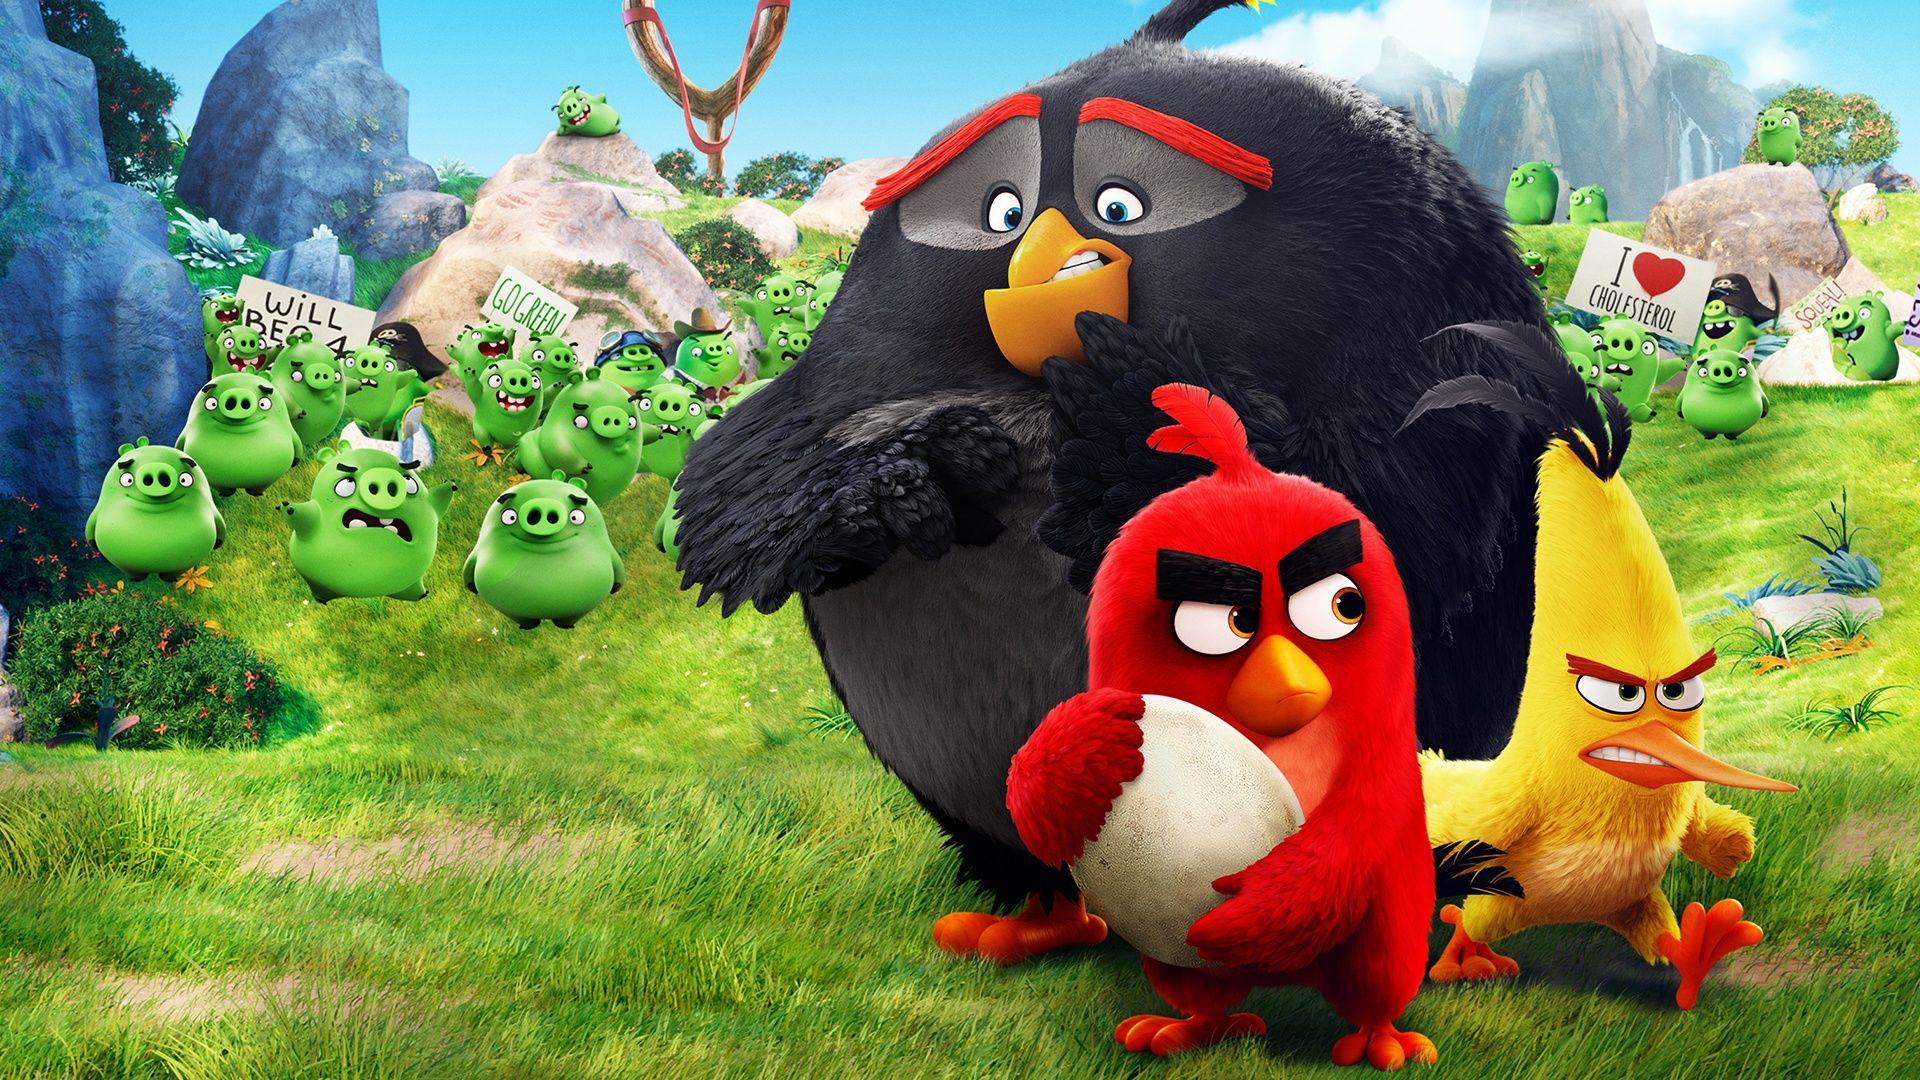 The Angry Birds Movie Full HD Wallpaper